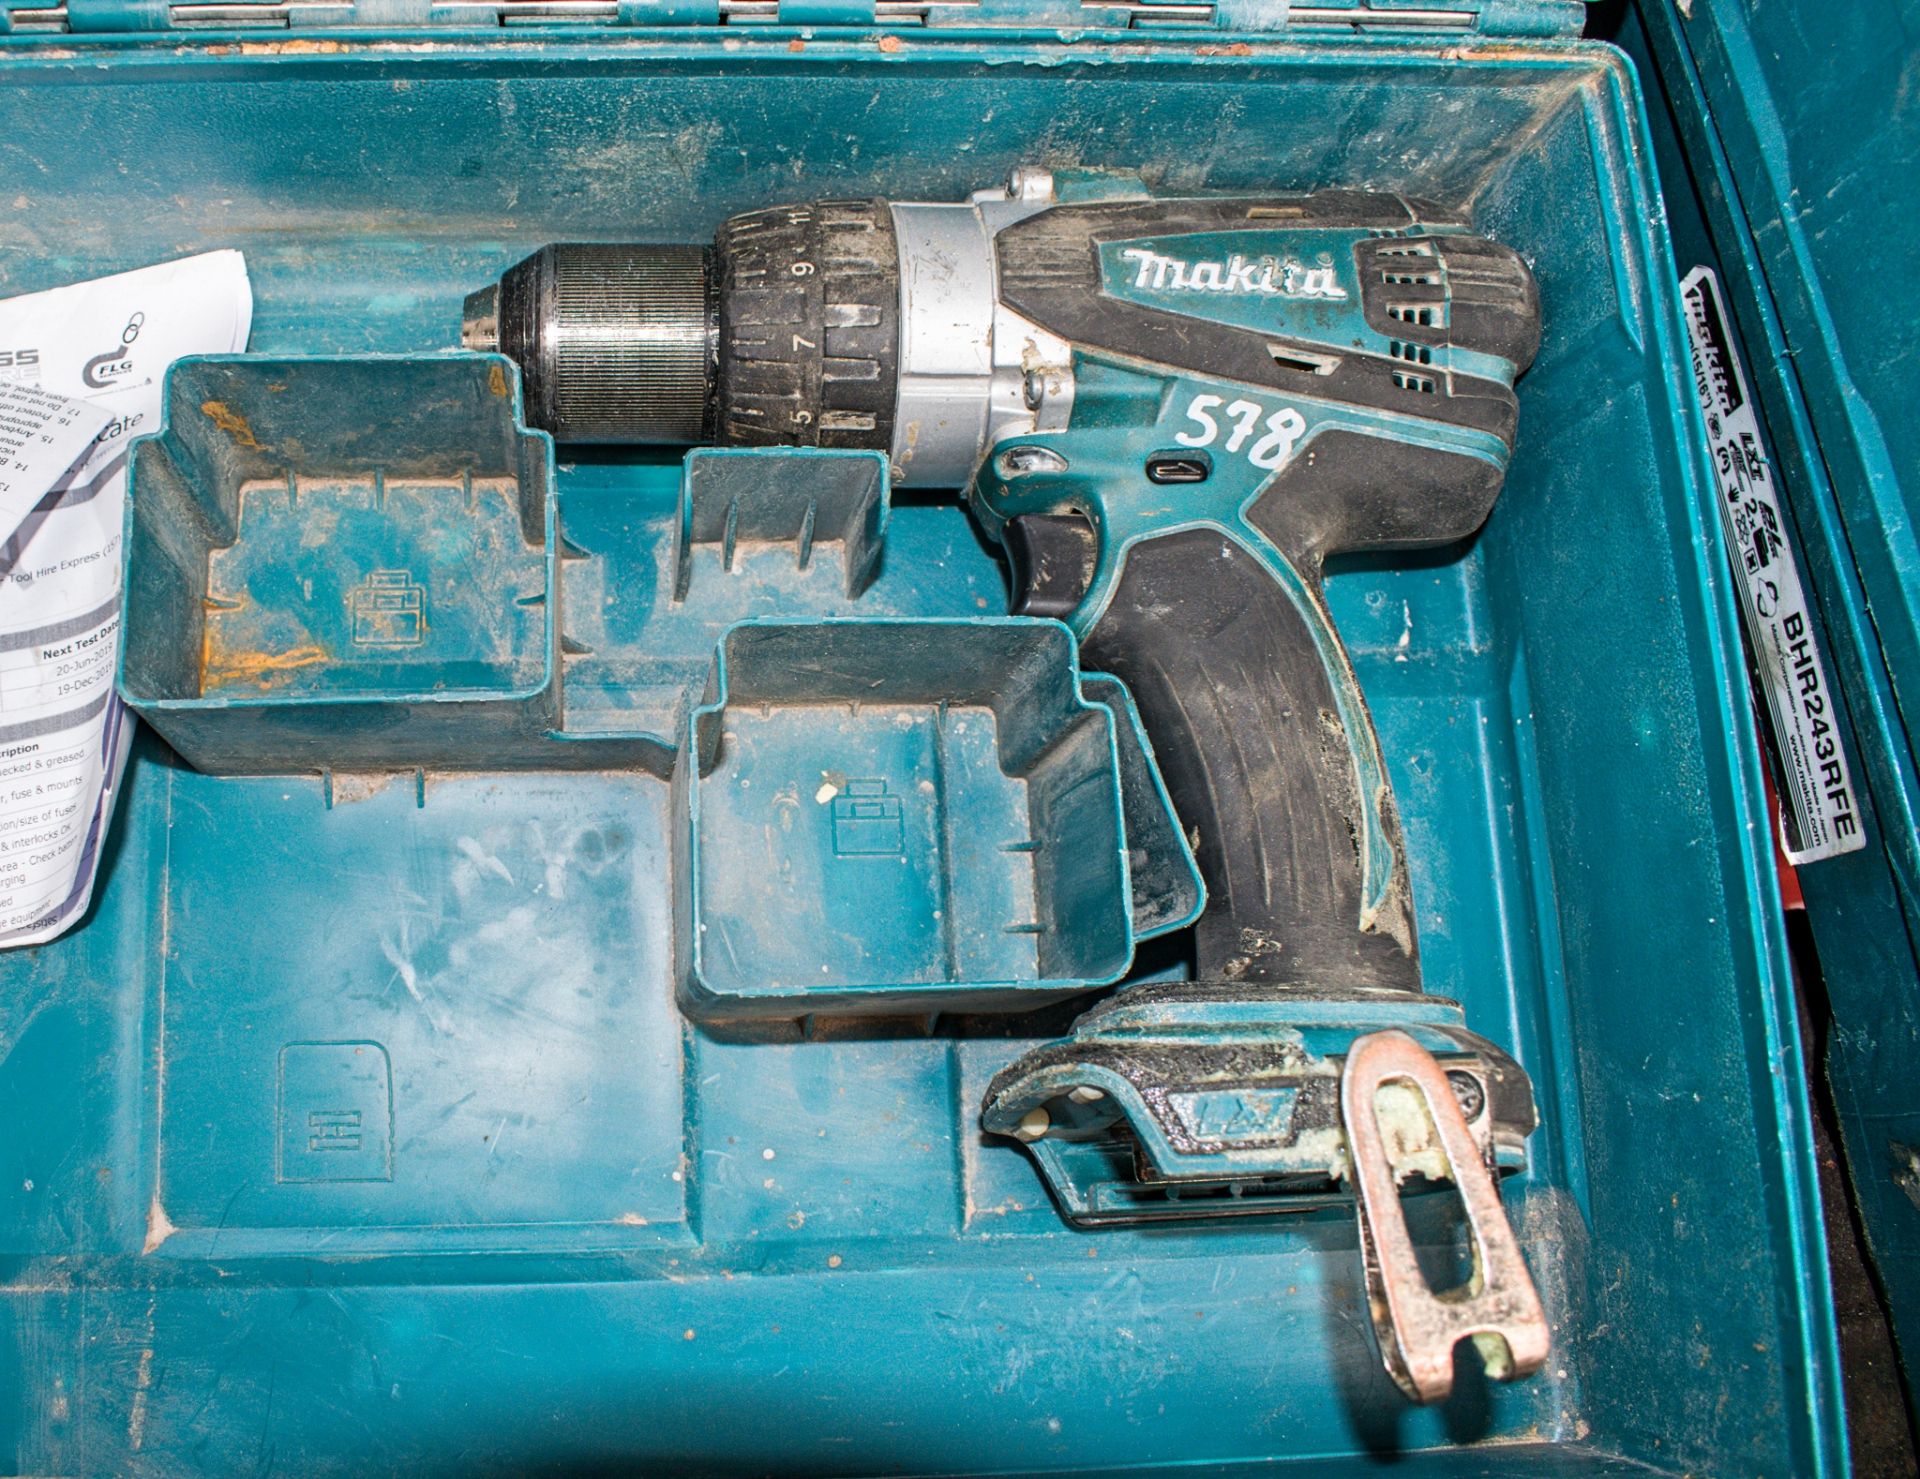 Makita 18v cordless drill c/w carry case ** No charger or battery ** A622979